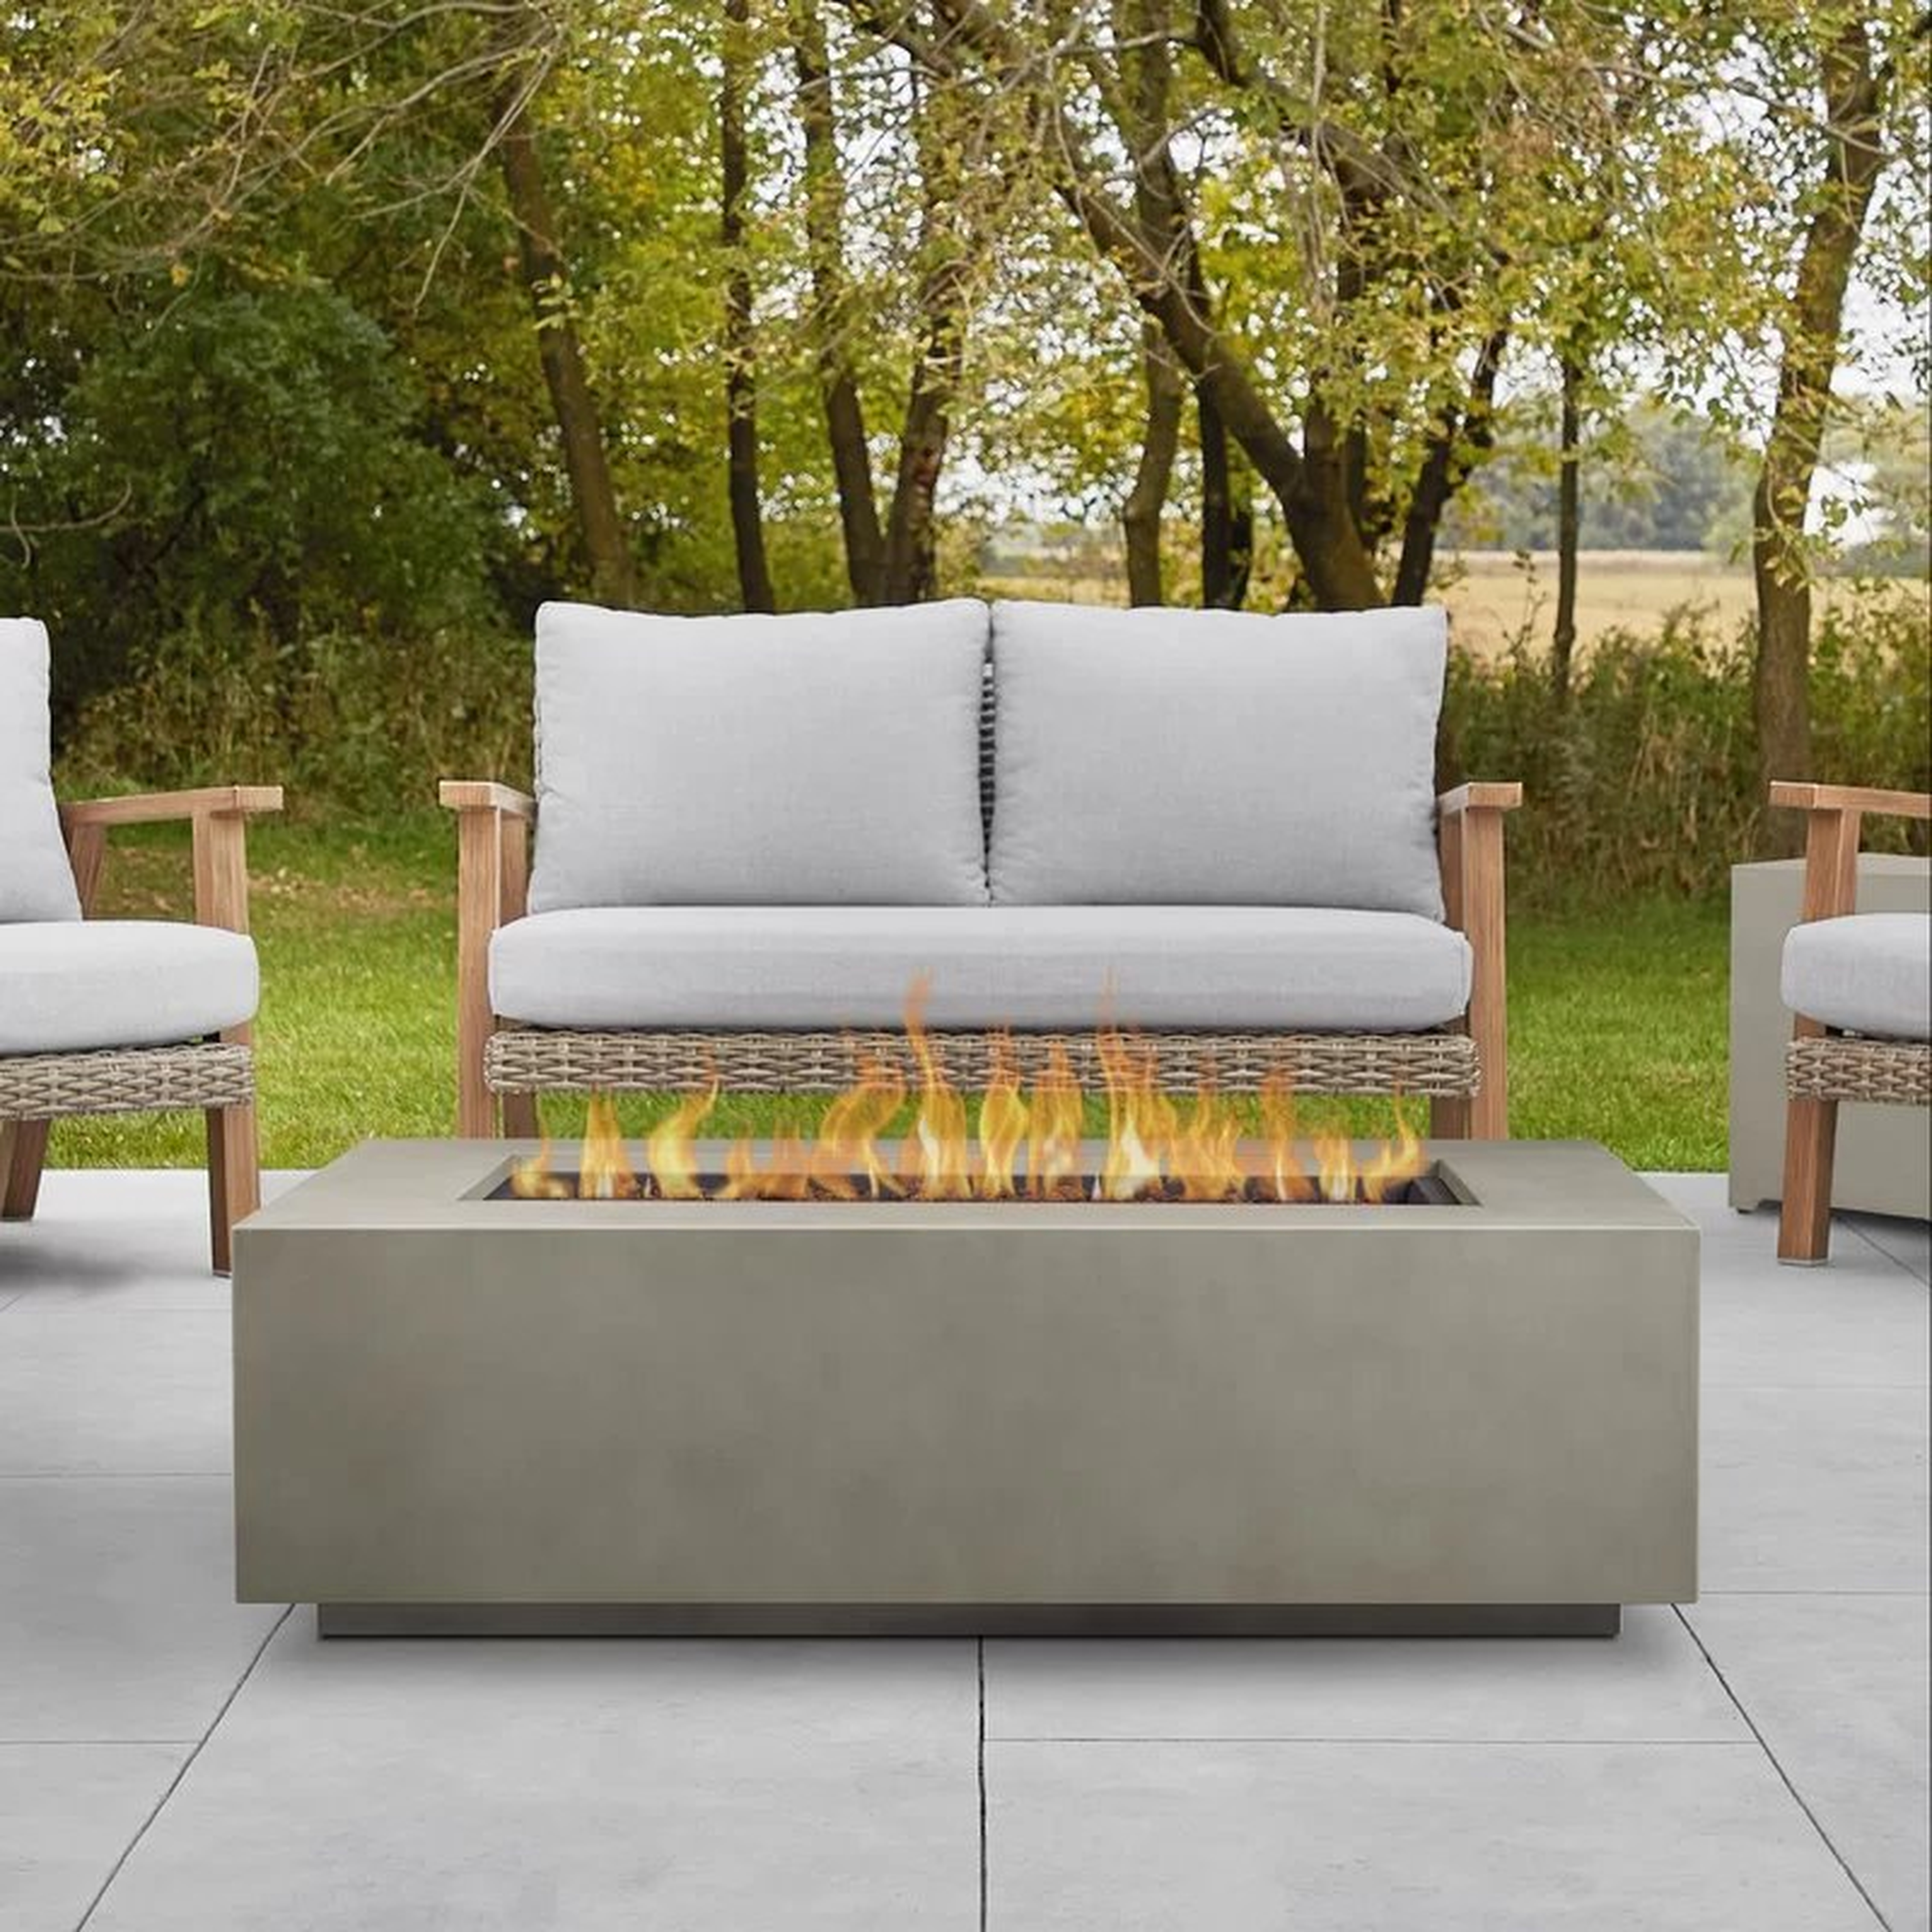 Aegean 15'' H x 50'' W" Steel Outdoor Fire Pit Table with Lid - Wayfair